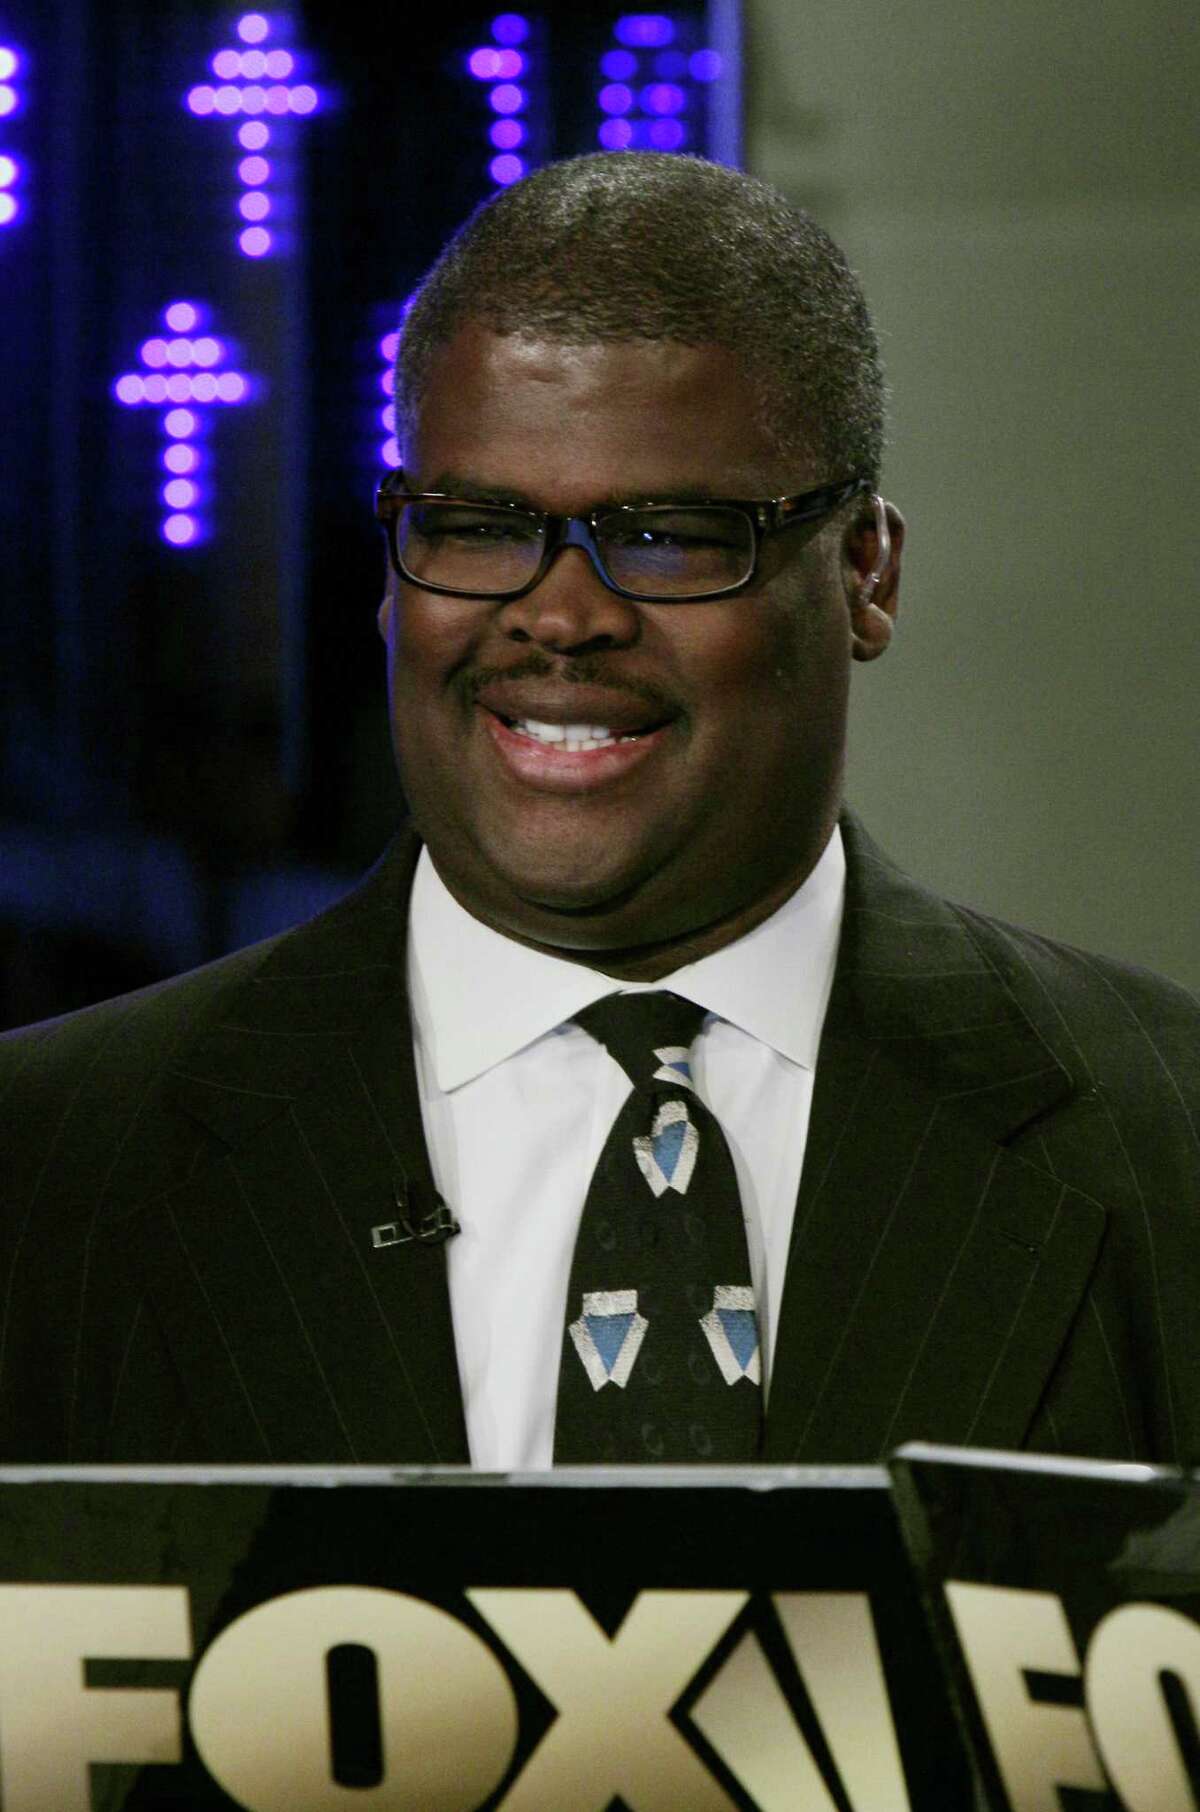 Charles Payne of the Fox Business Network has been suspended after reportedly being accused of sexual harassment.